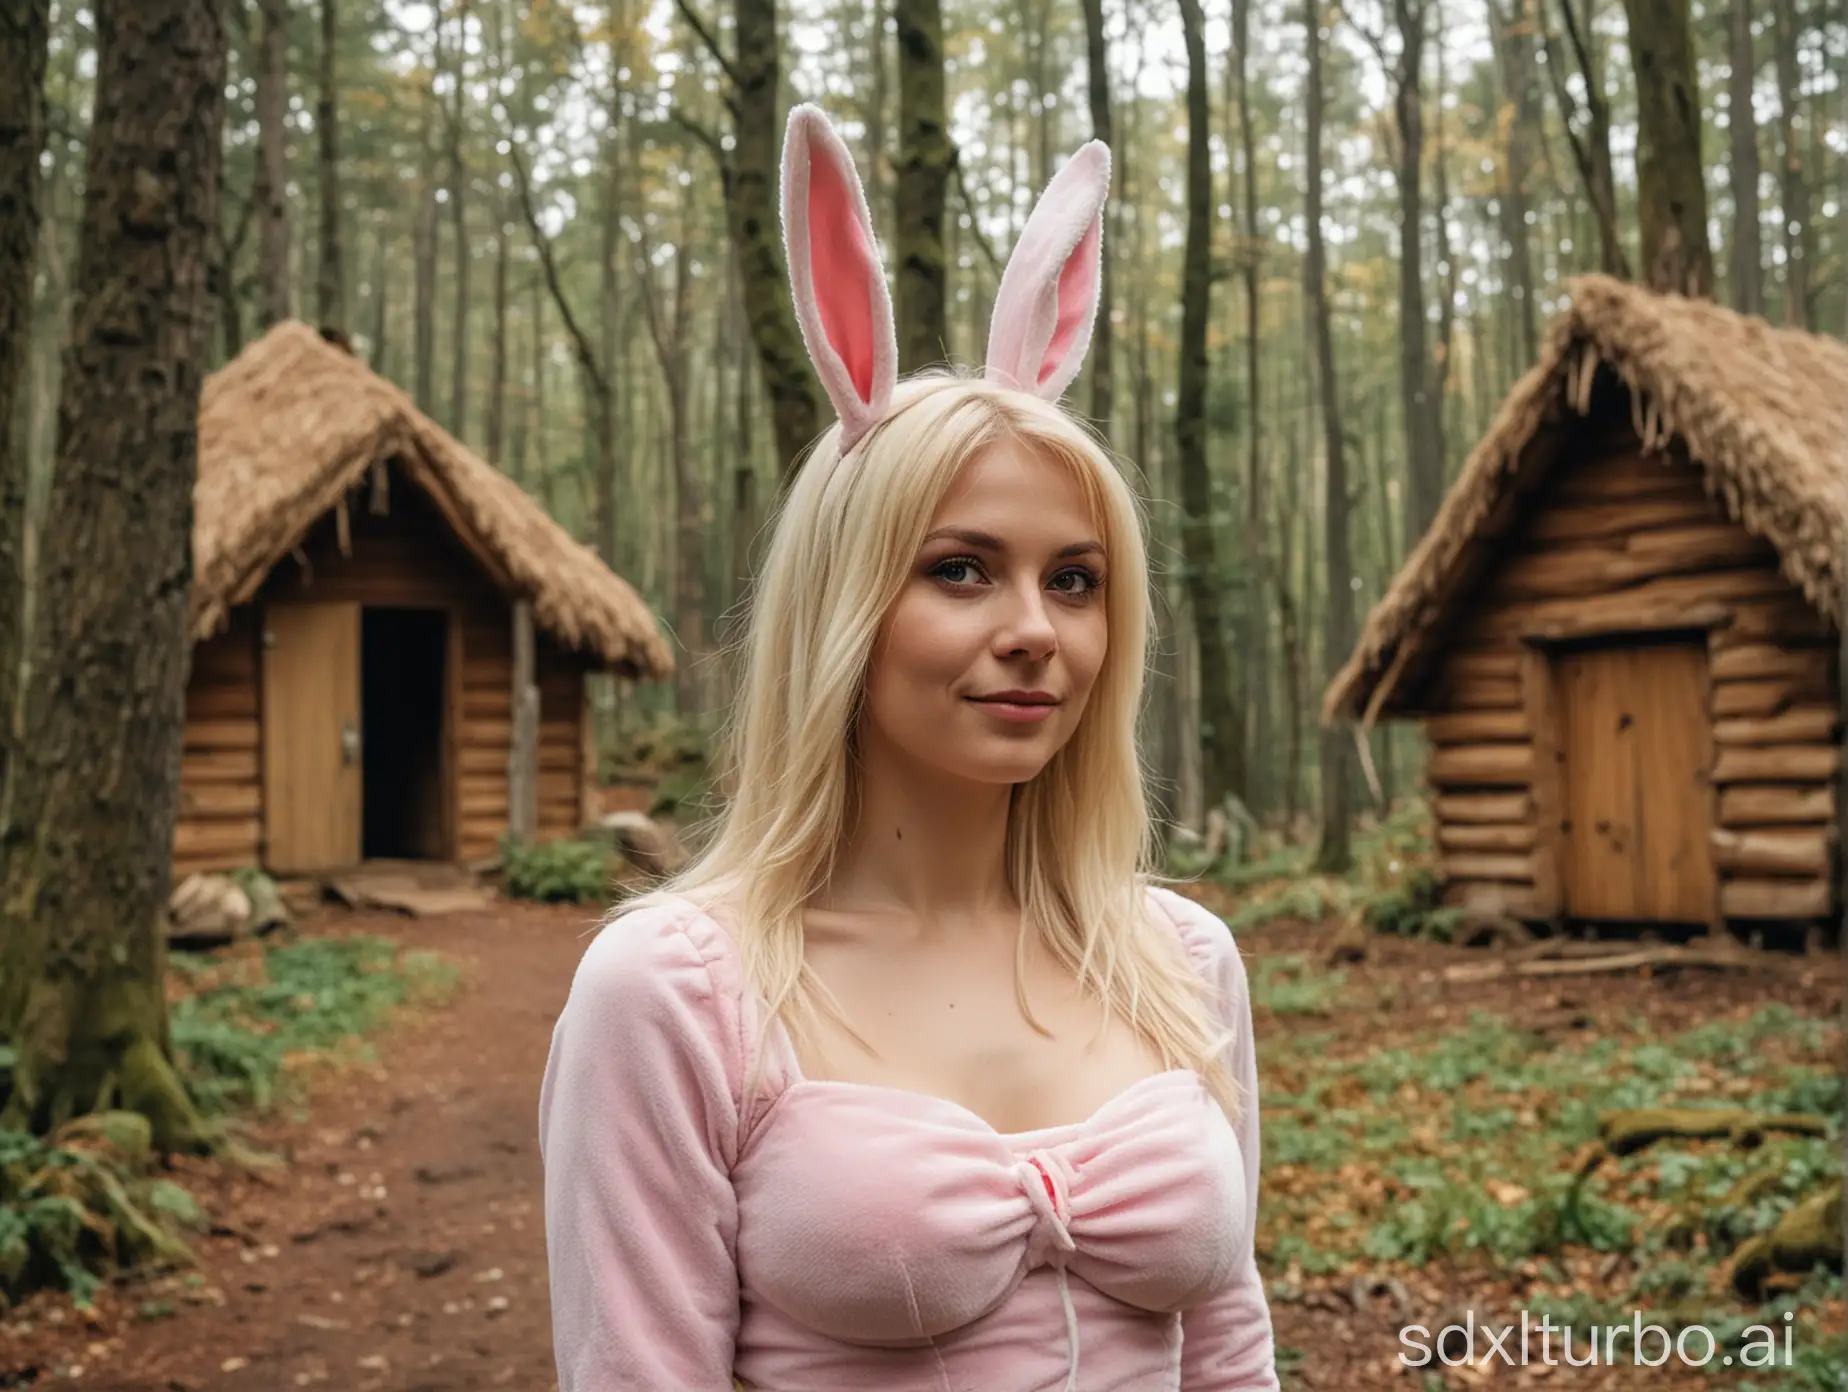 Blonde-Woman-in-Bunny-Costume-near-Forest-Hut